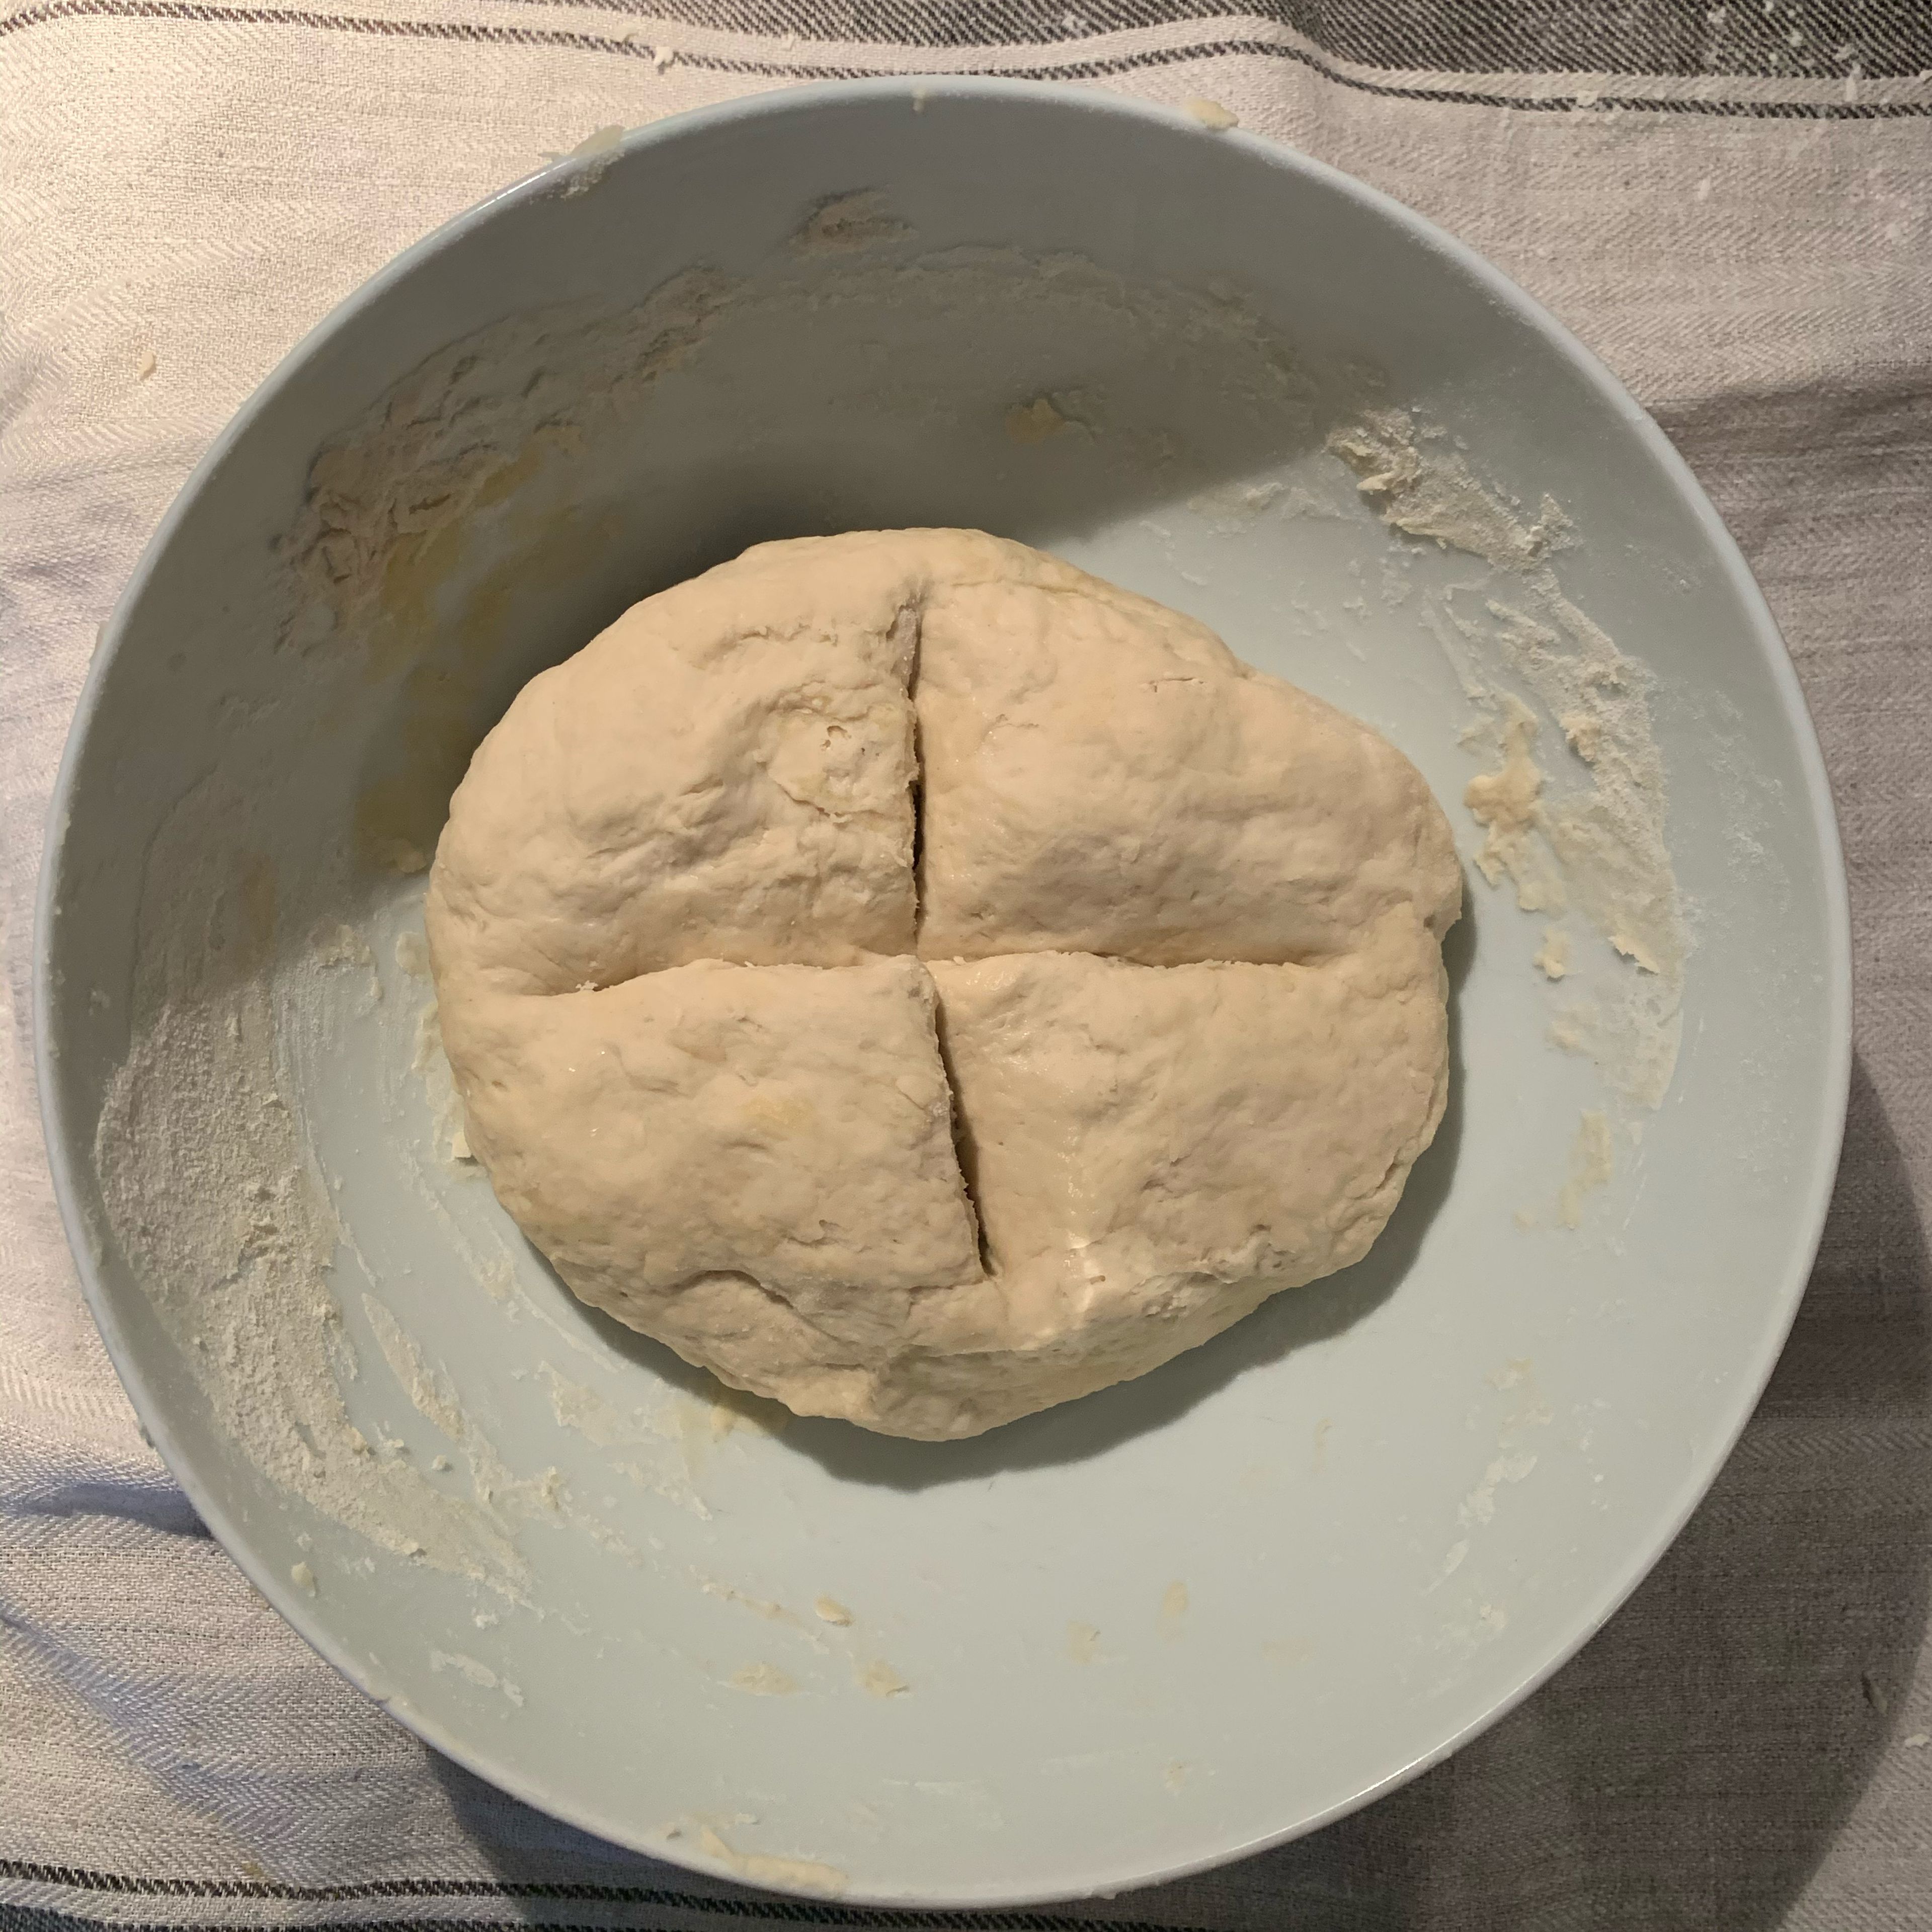 When you get an homogeneous dough without any lumps, cover the bowl with a clean kitchen towel and place it in the turned off oven. Let it rest and allow the dough to rise for at least 2.5 hours.